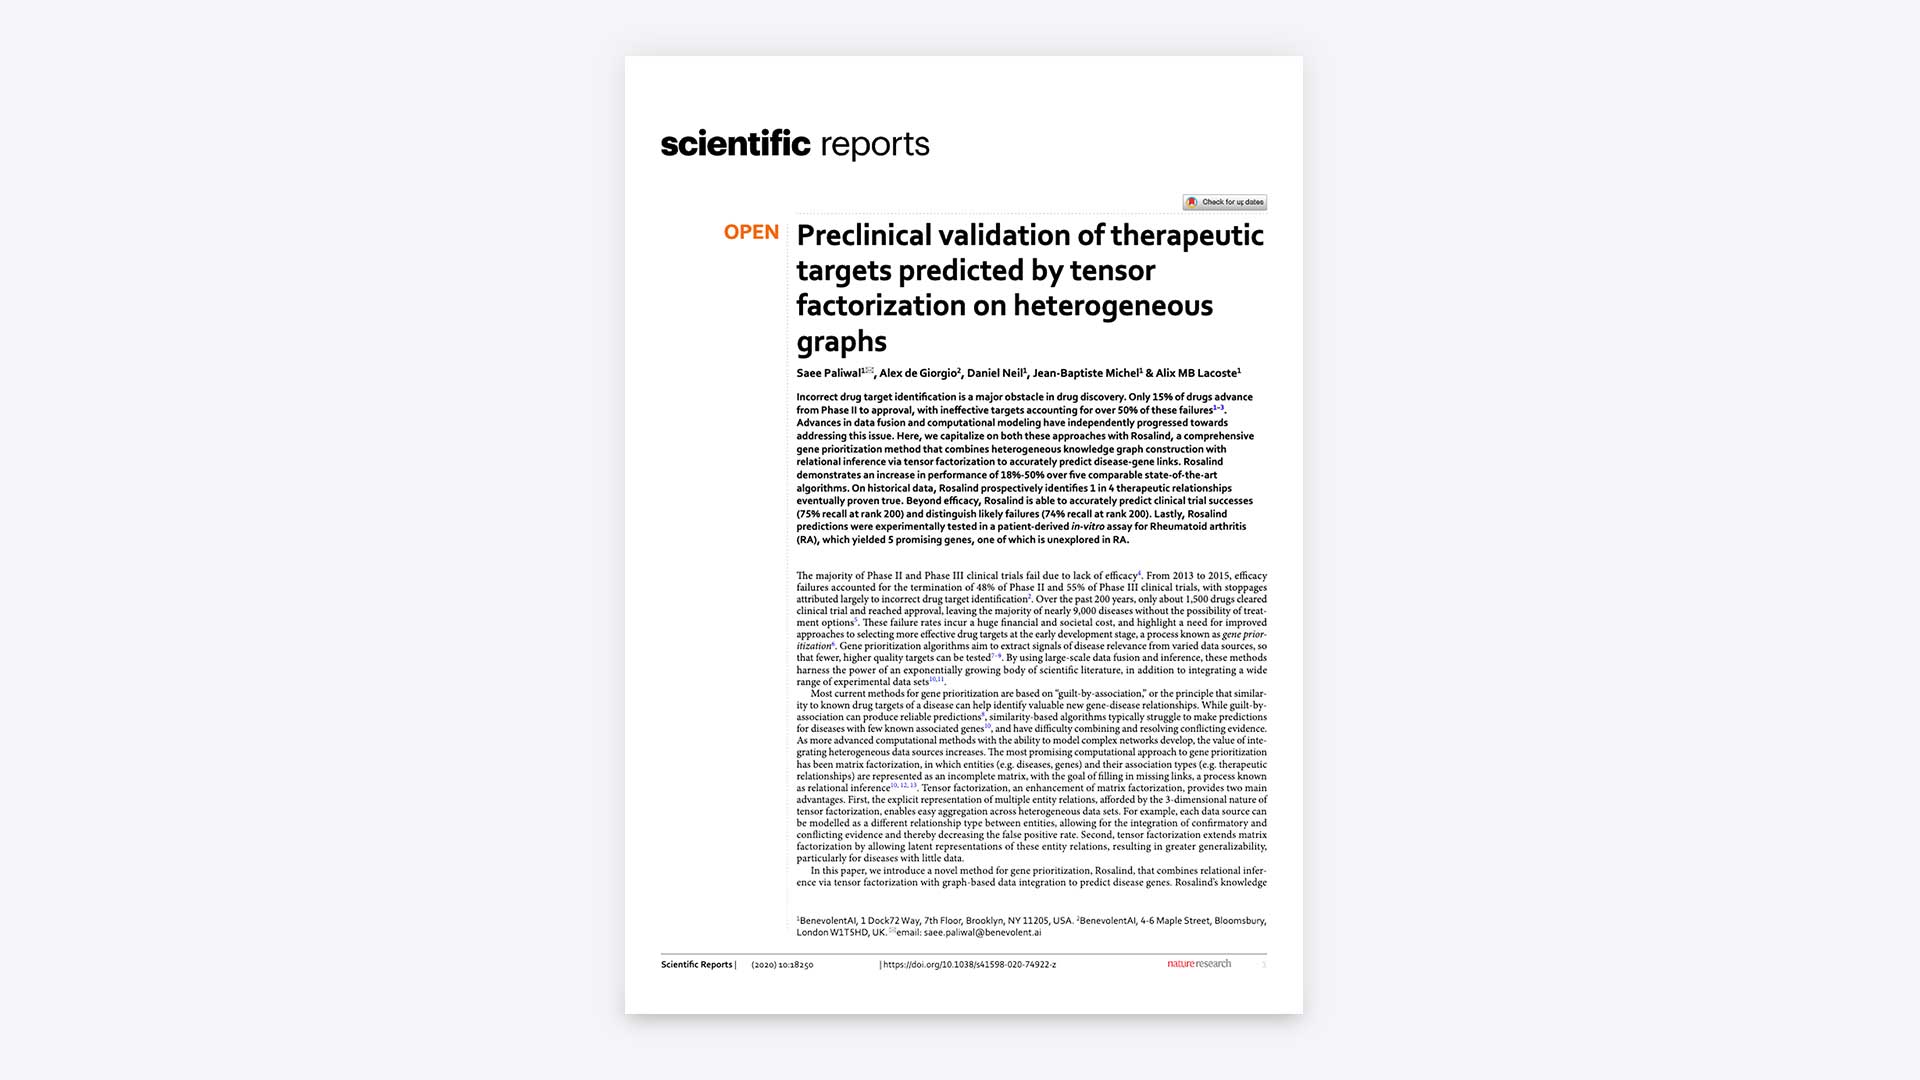 Rosalind_-_Preclinical_validation_of_therapeutic_targets_predicted_by_tensor_factorization_on_heterogeneous_graphs.jpg